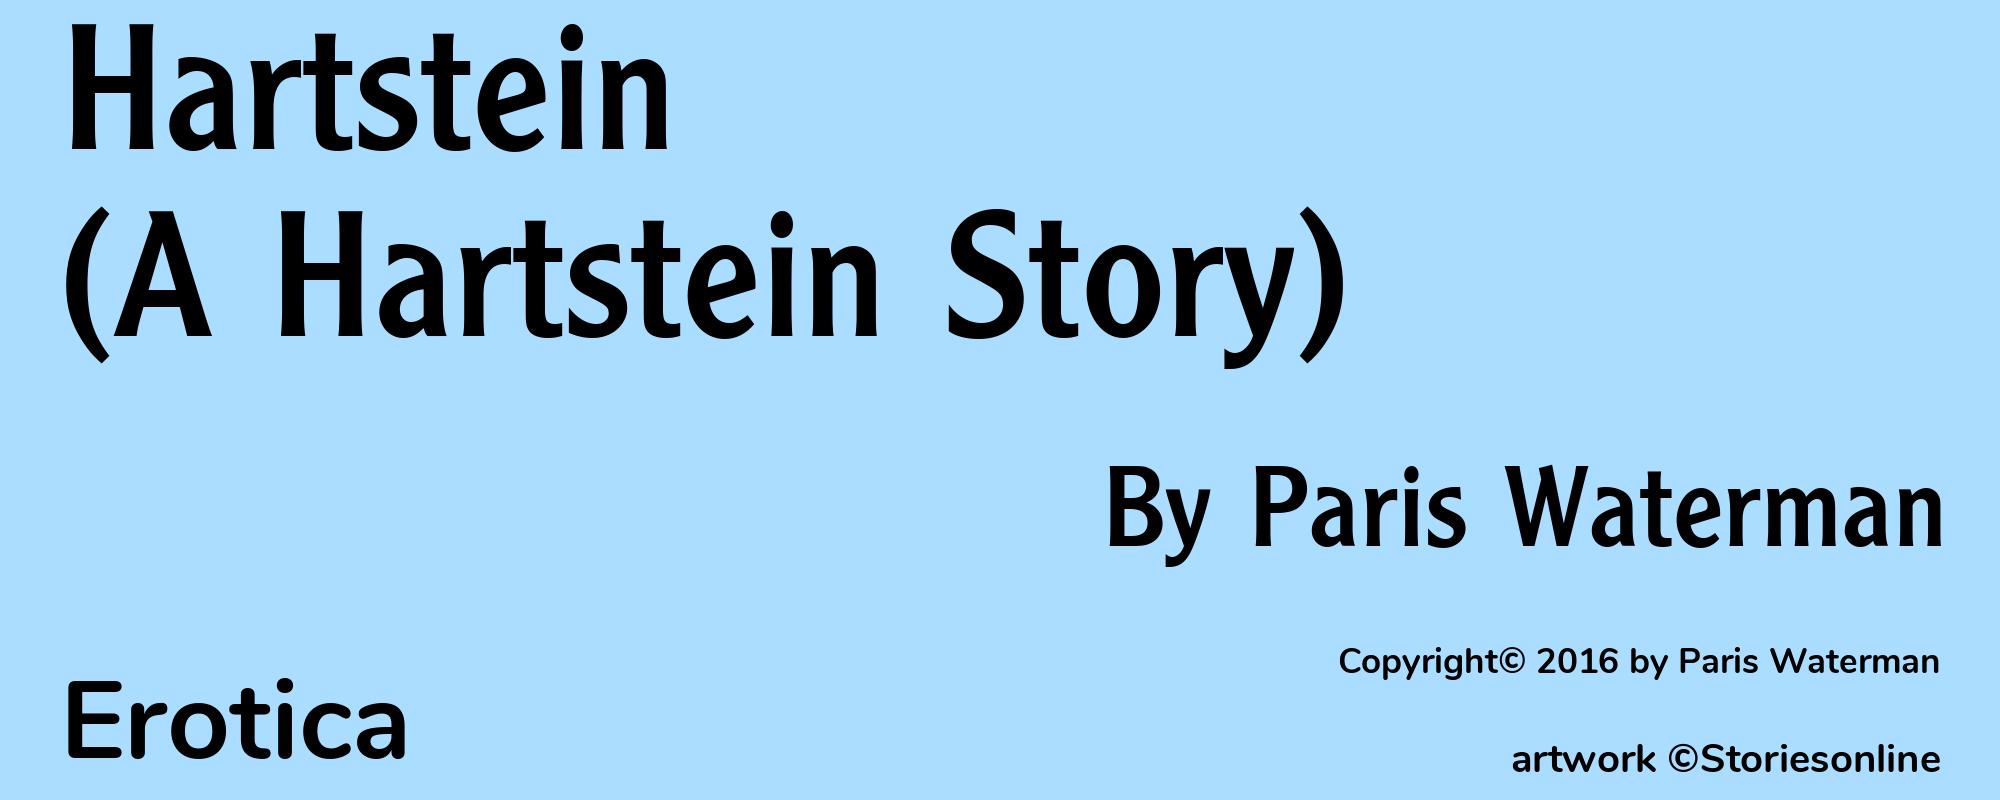 Hartstein (A Hartstein Story) - Cover